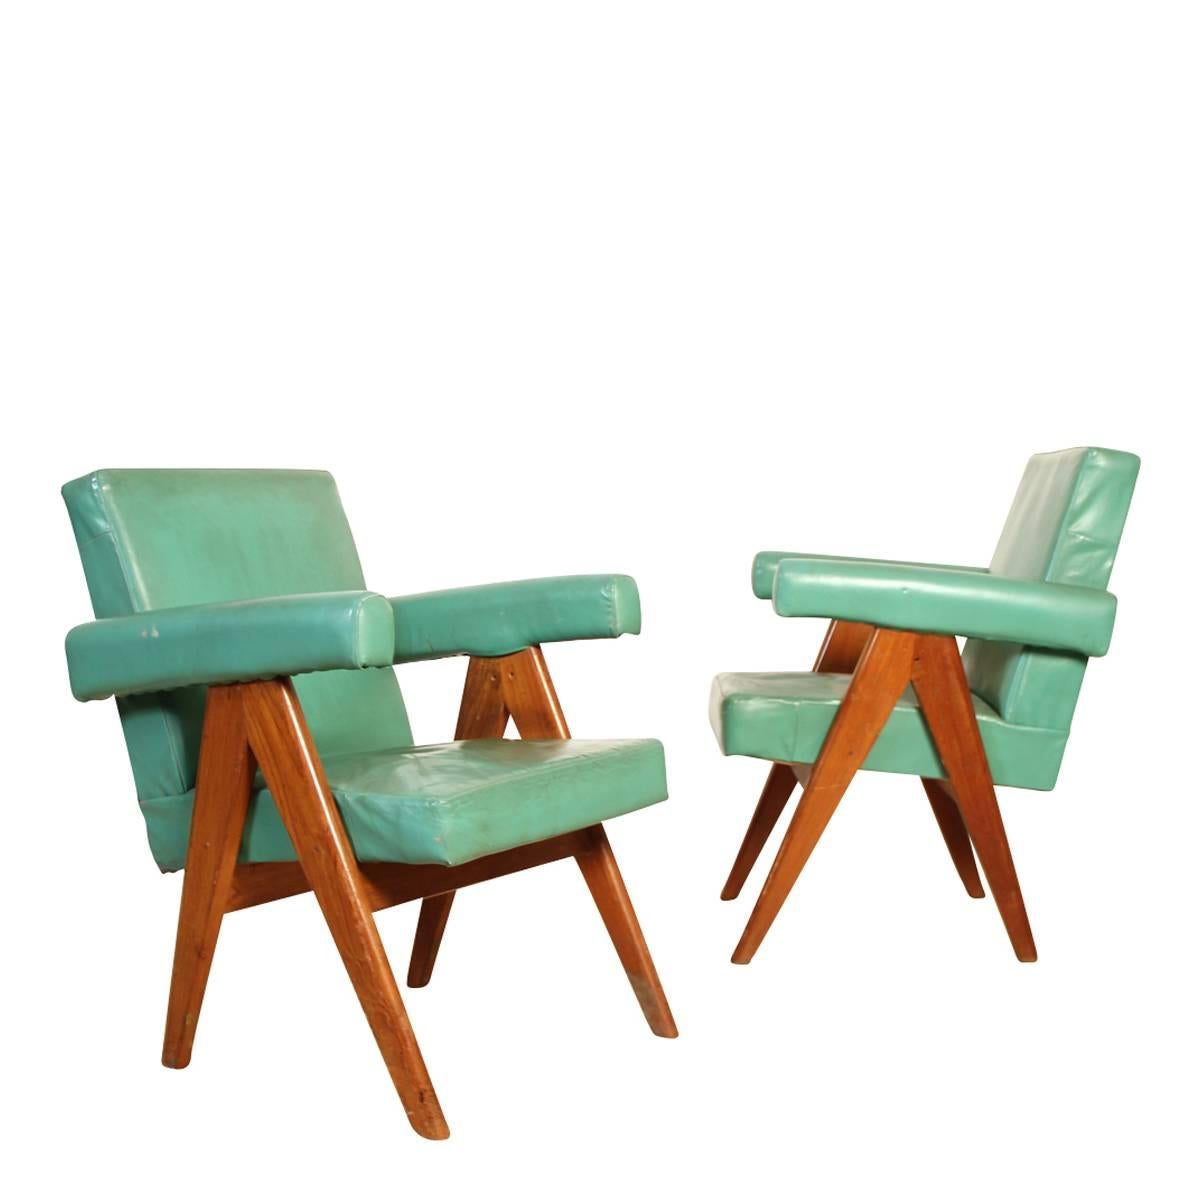 Set of Two Committee Chair by Pierre Jeanneret, Chandigarh, circa 1953